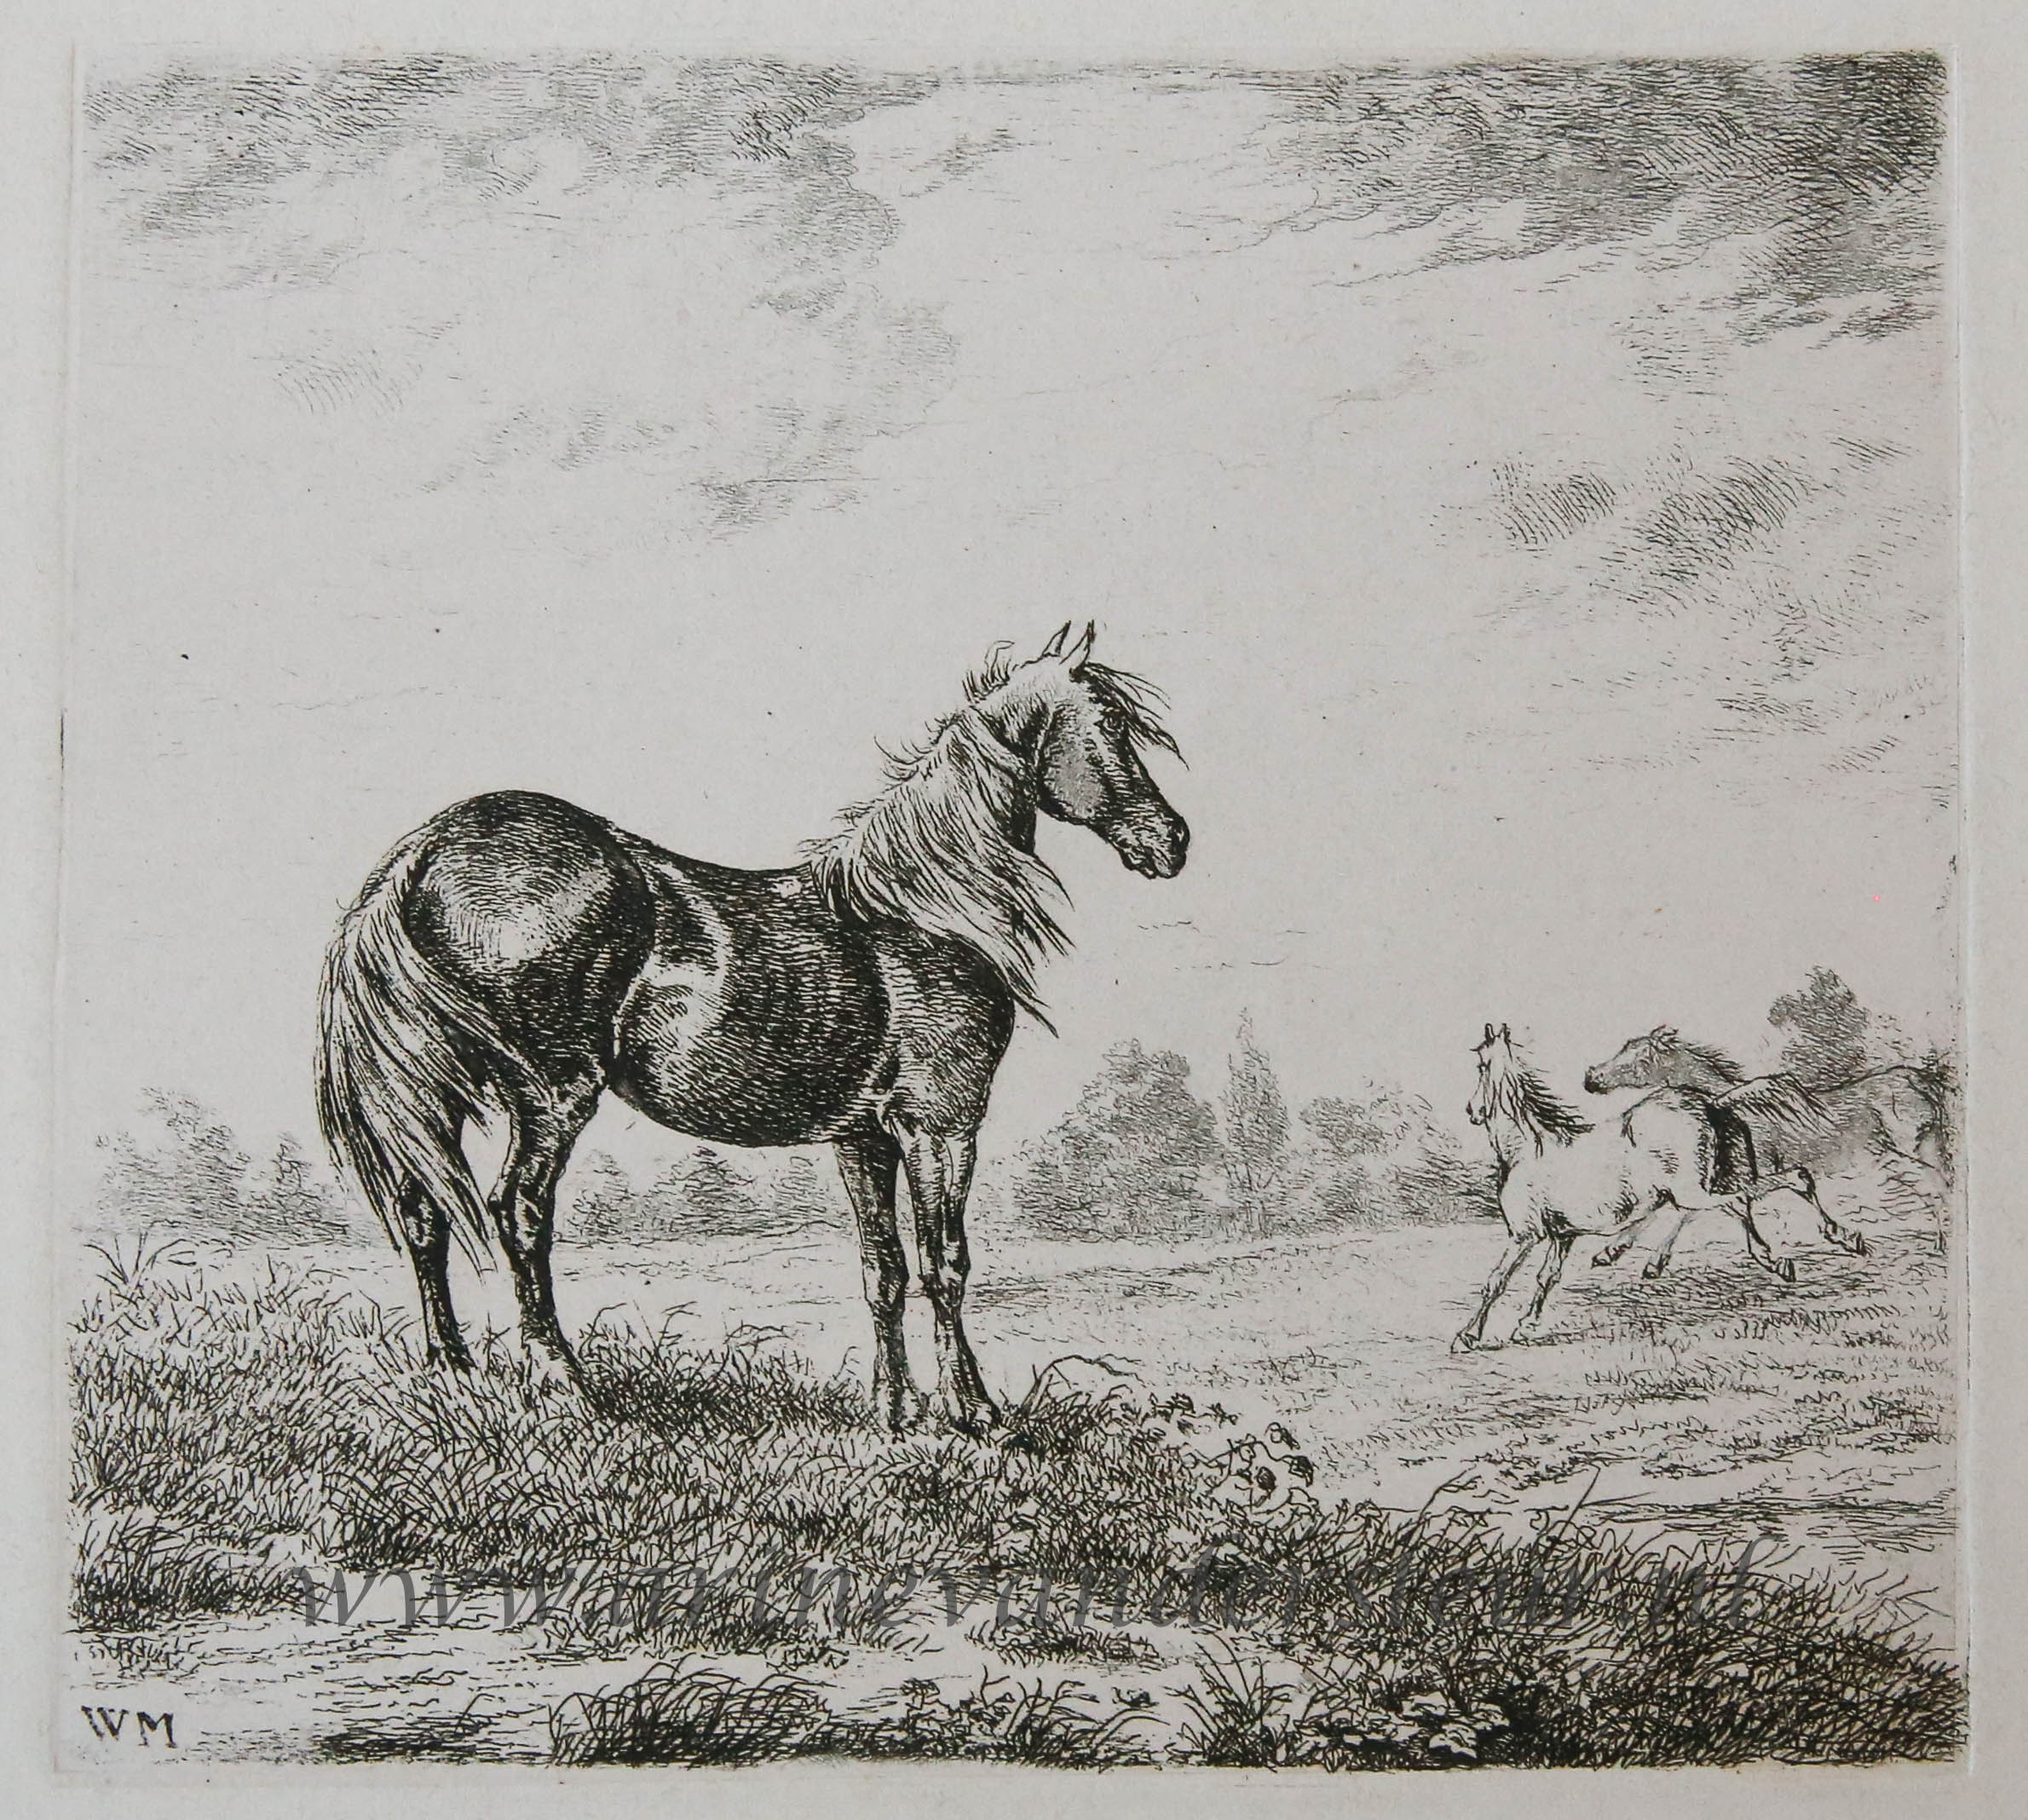 [Antique print, etching] Landscape with three horses. by Moorrees ...